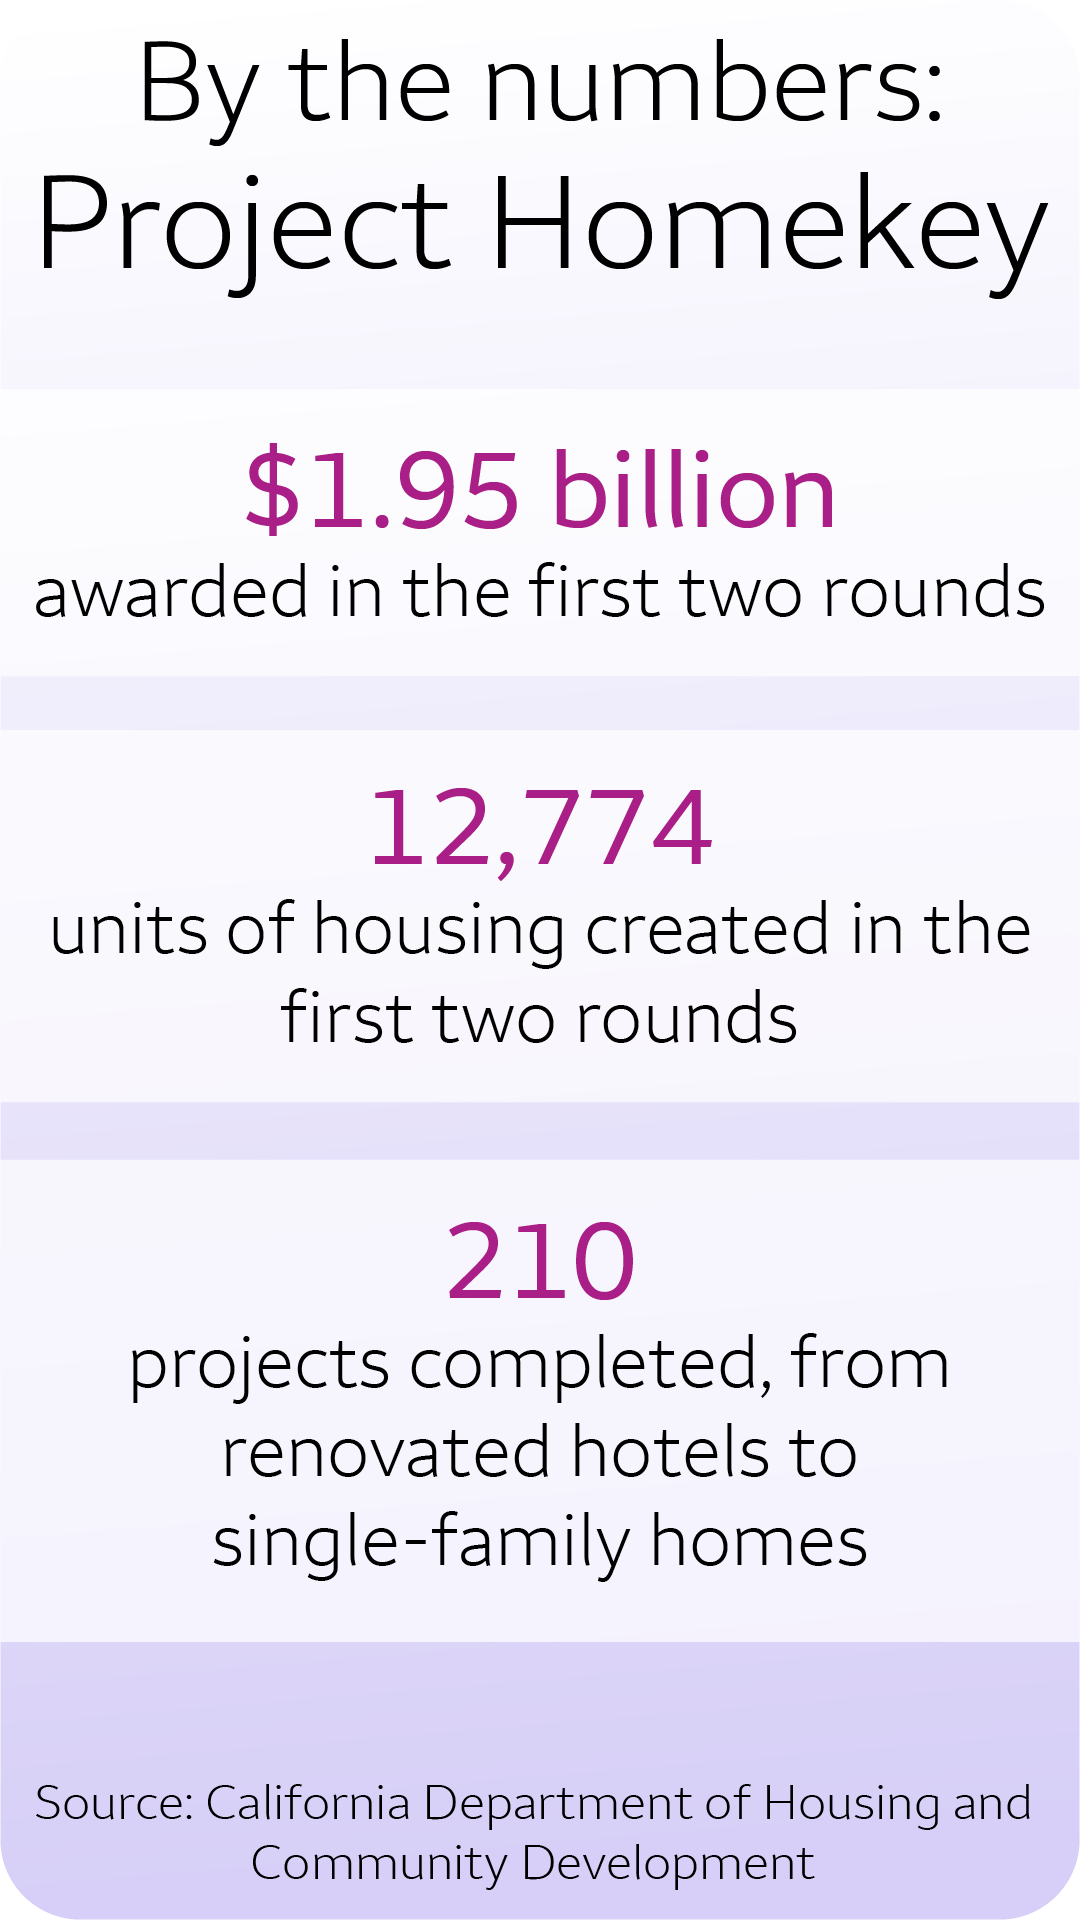 A vertical graphic shows three statistics showing the impacts of the Project Homekey program.